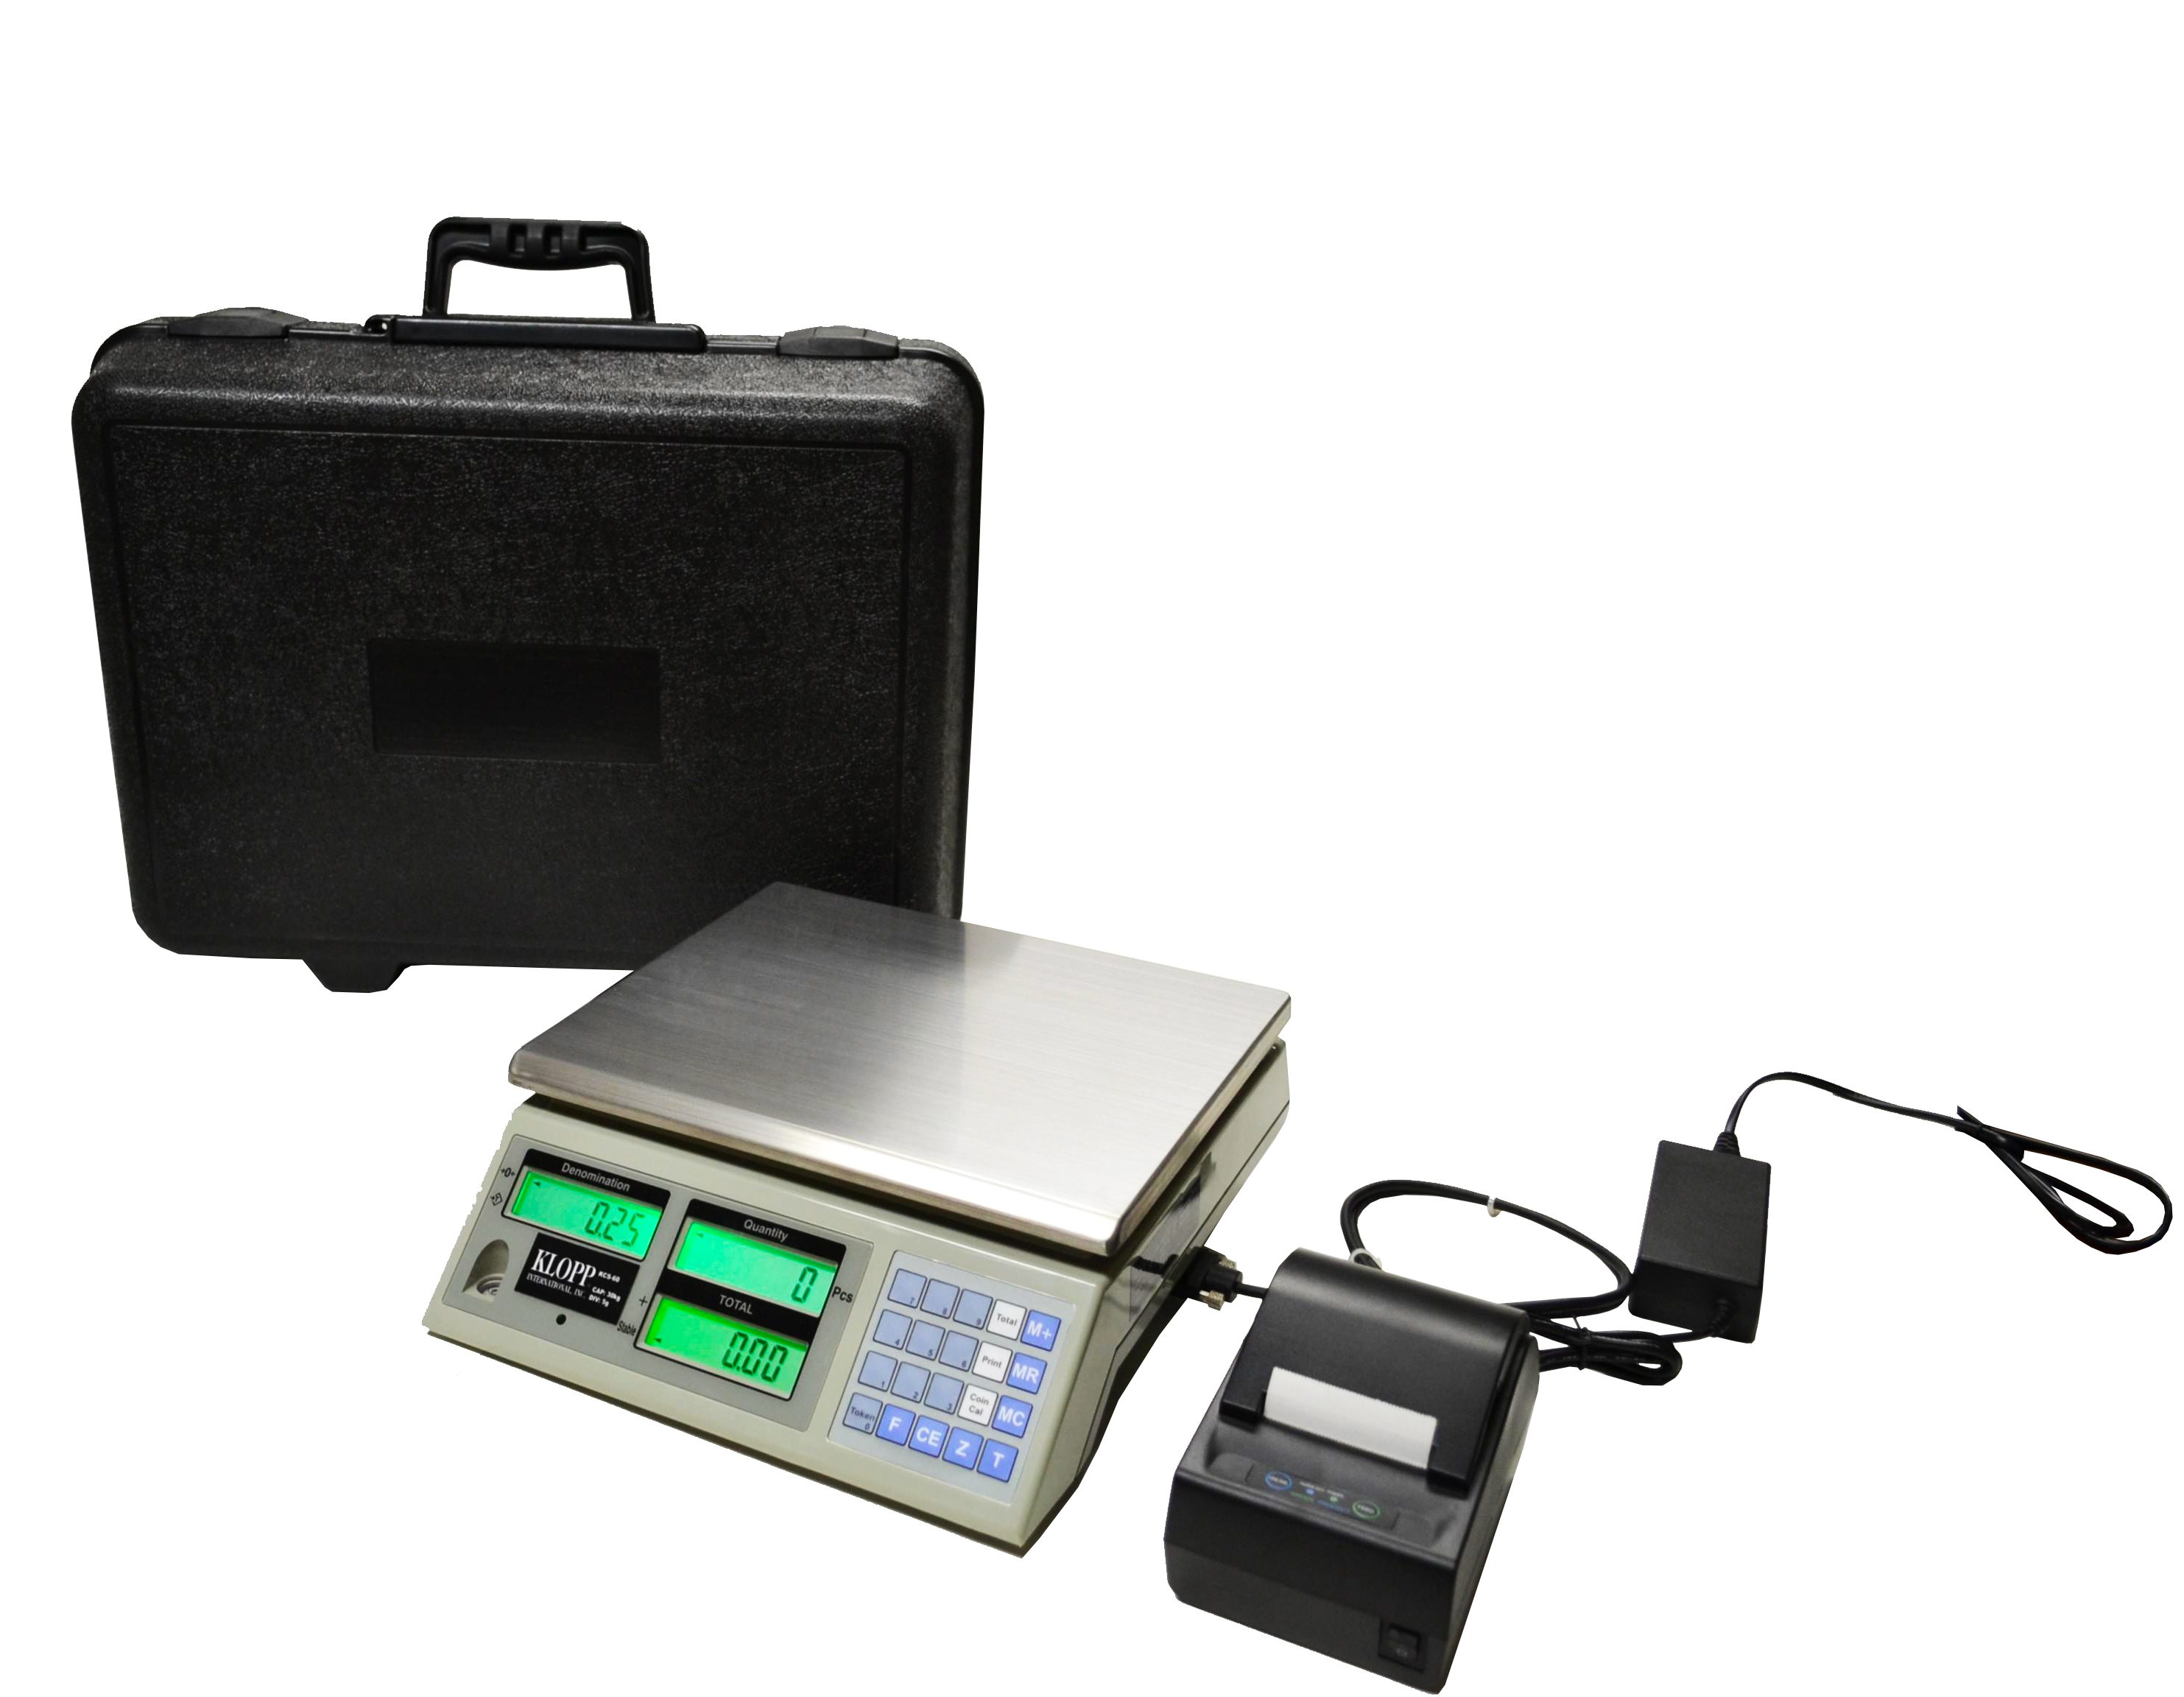 Portable Battery Operated Scales Weigh Coins Tokens Tickets — Klopp Coin